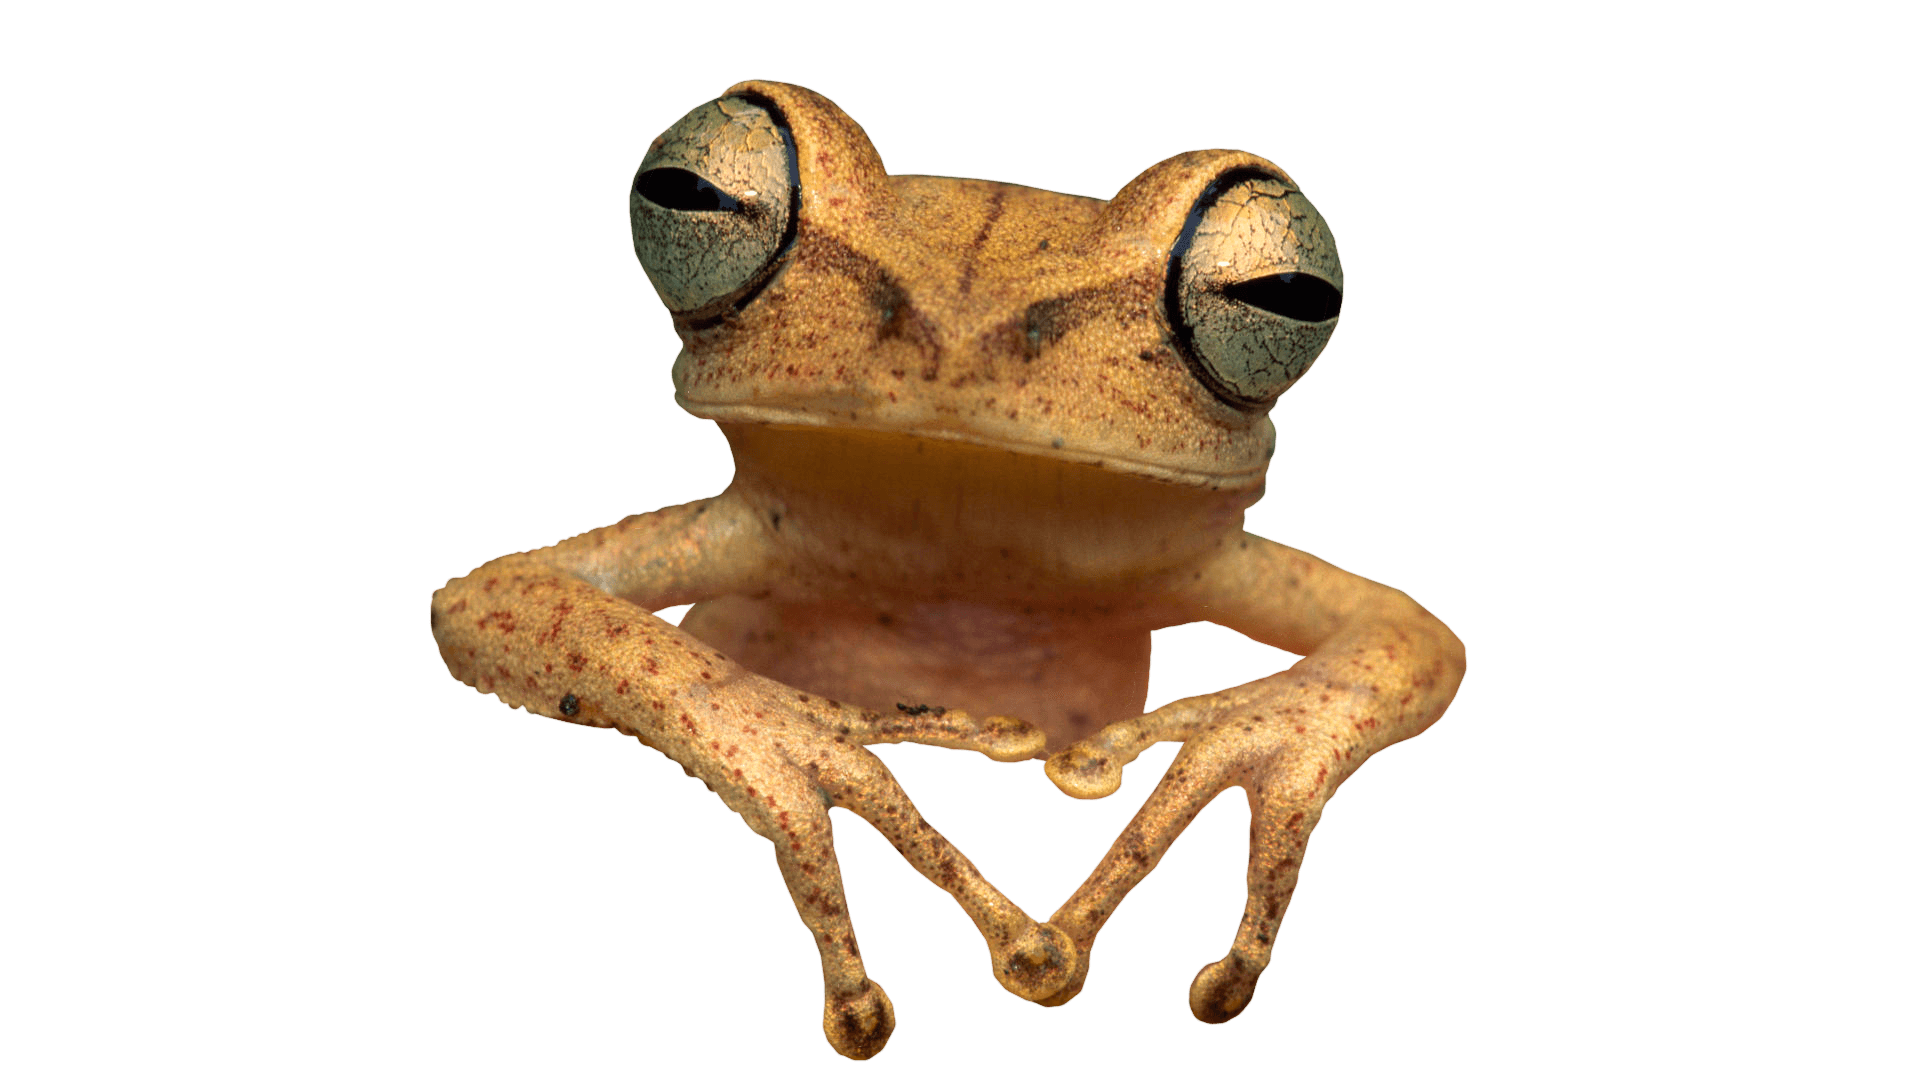 Toad clipart side view. Frog transparent png stickpng